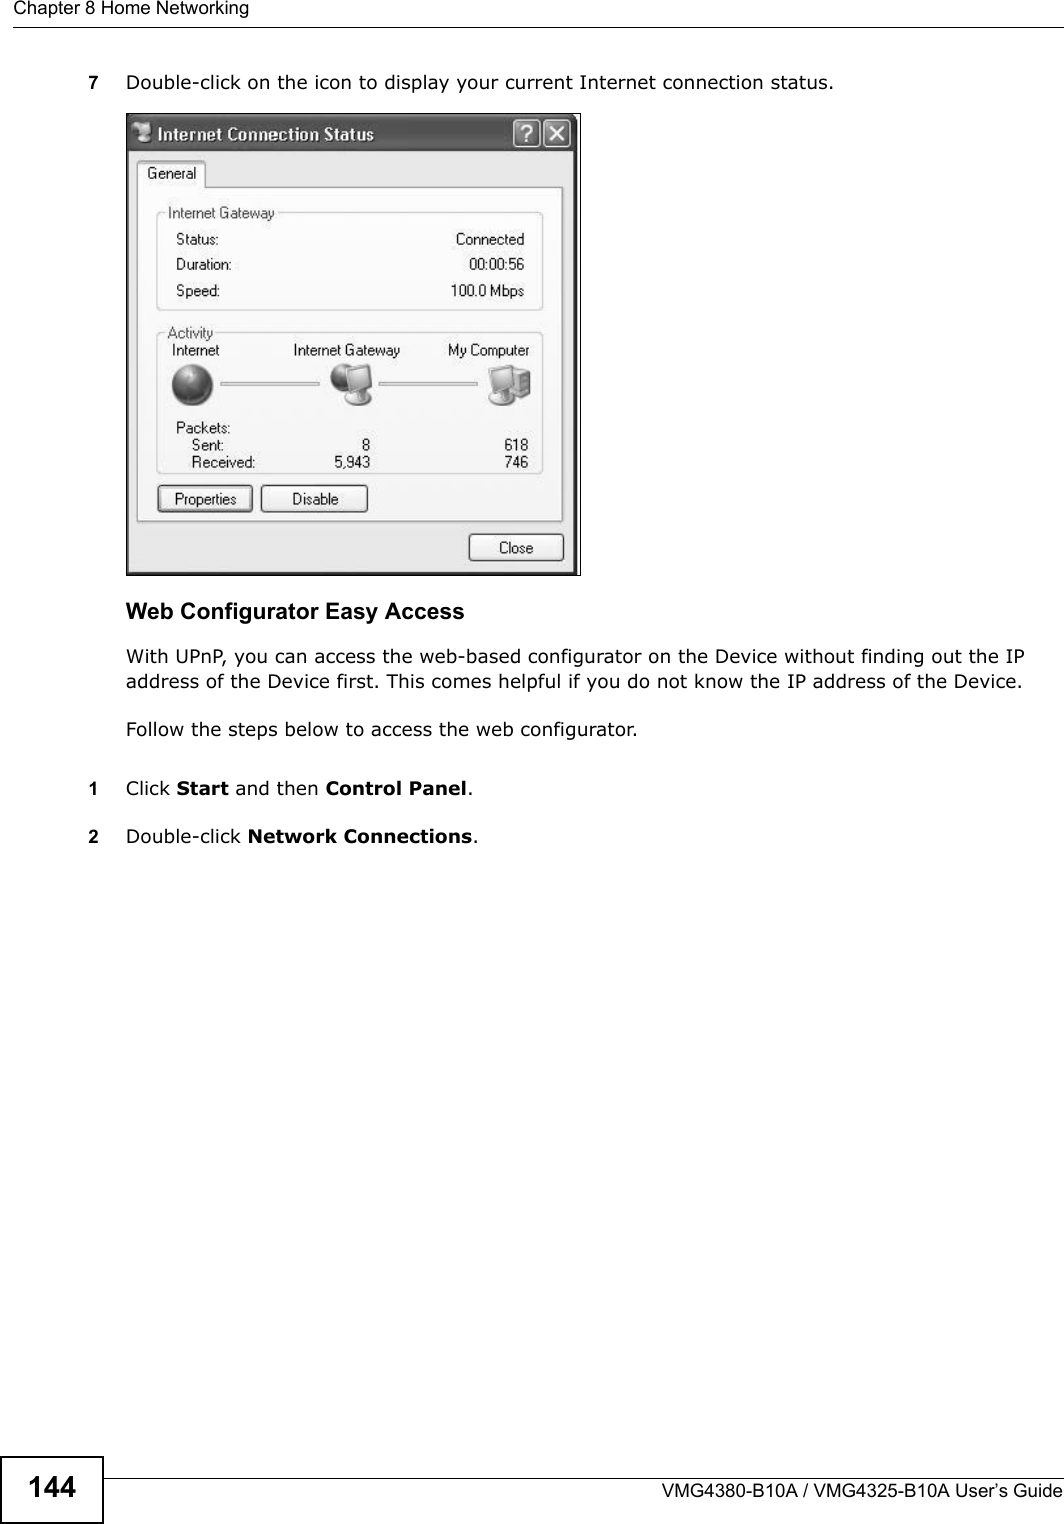 Chapter 8 Home NetworkingVMG4380-B10A / VMG4325-B10A User’s Guide1447Double-click on the icon to display your current Internet connection status.Internet Connection StatusWeb Configurator Easy AccessWith UPnP, you can access the web-based configurator on the Device without finding out the IP address of the Device first. This comes helpful if you do not know the IP address of the Device.Follow the steps below to access the web configurator.1Click Start and then Control Panel. 2Double-click Network Connections. 